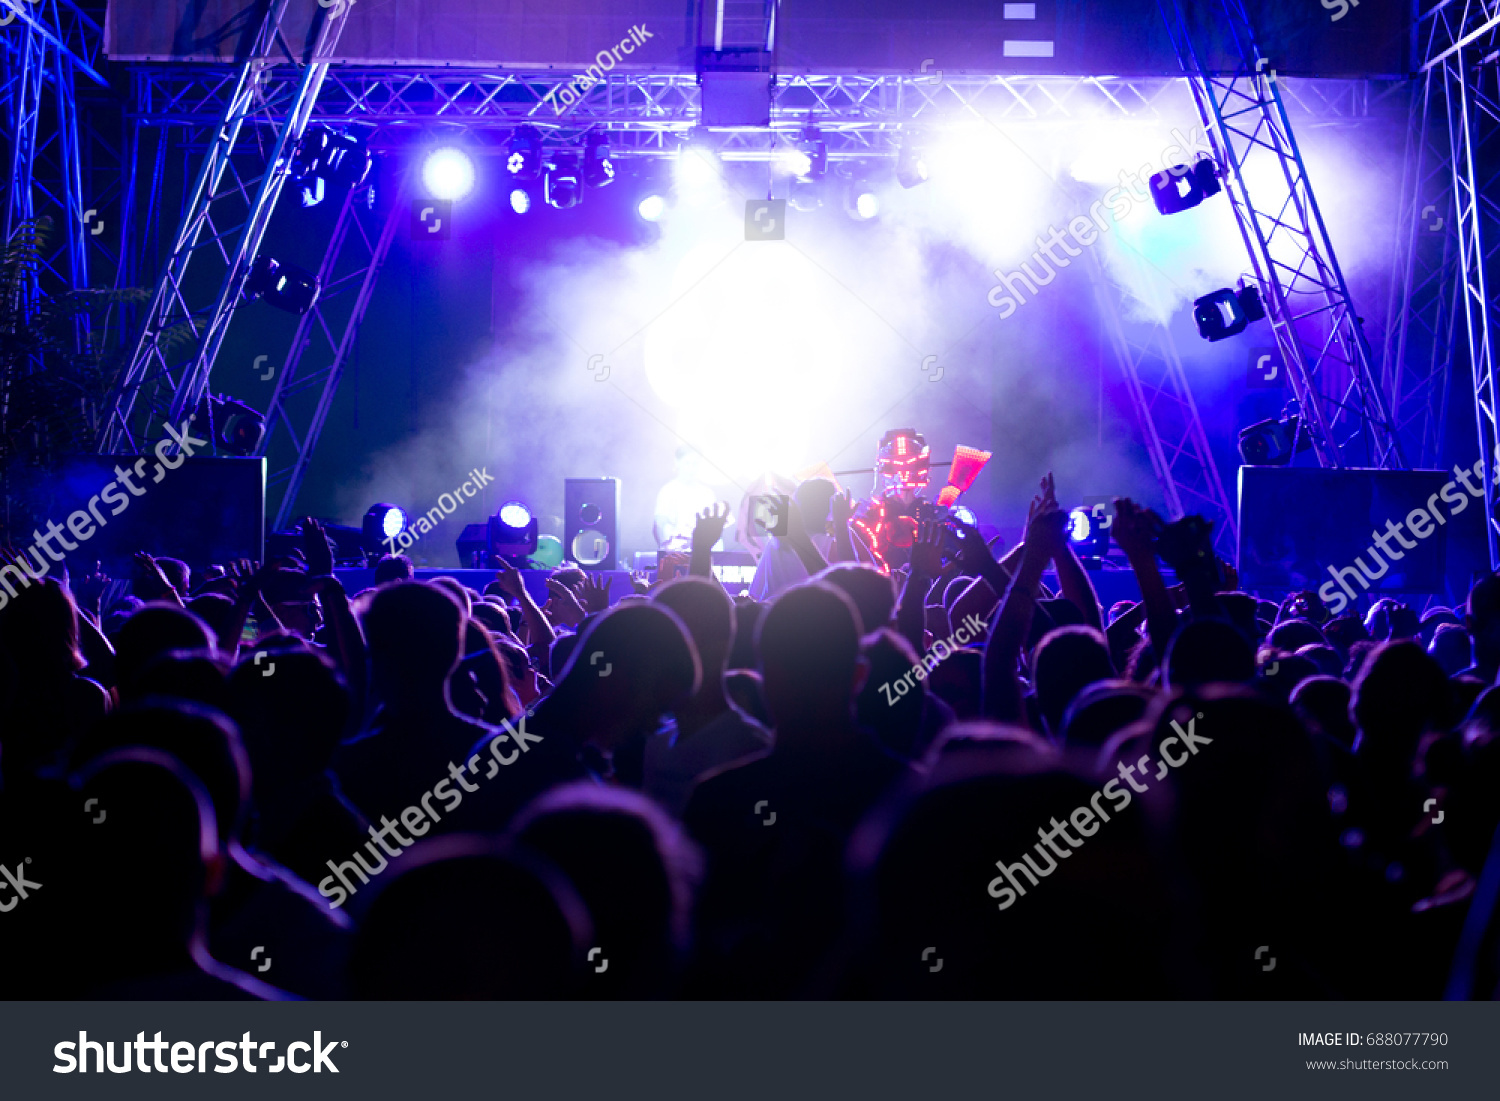 Crowd at concert and blurred stage lights #688077790